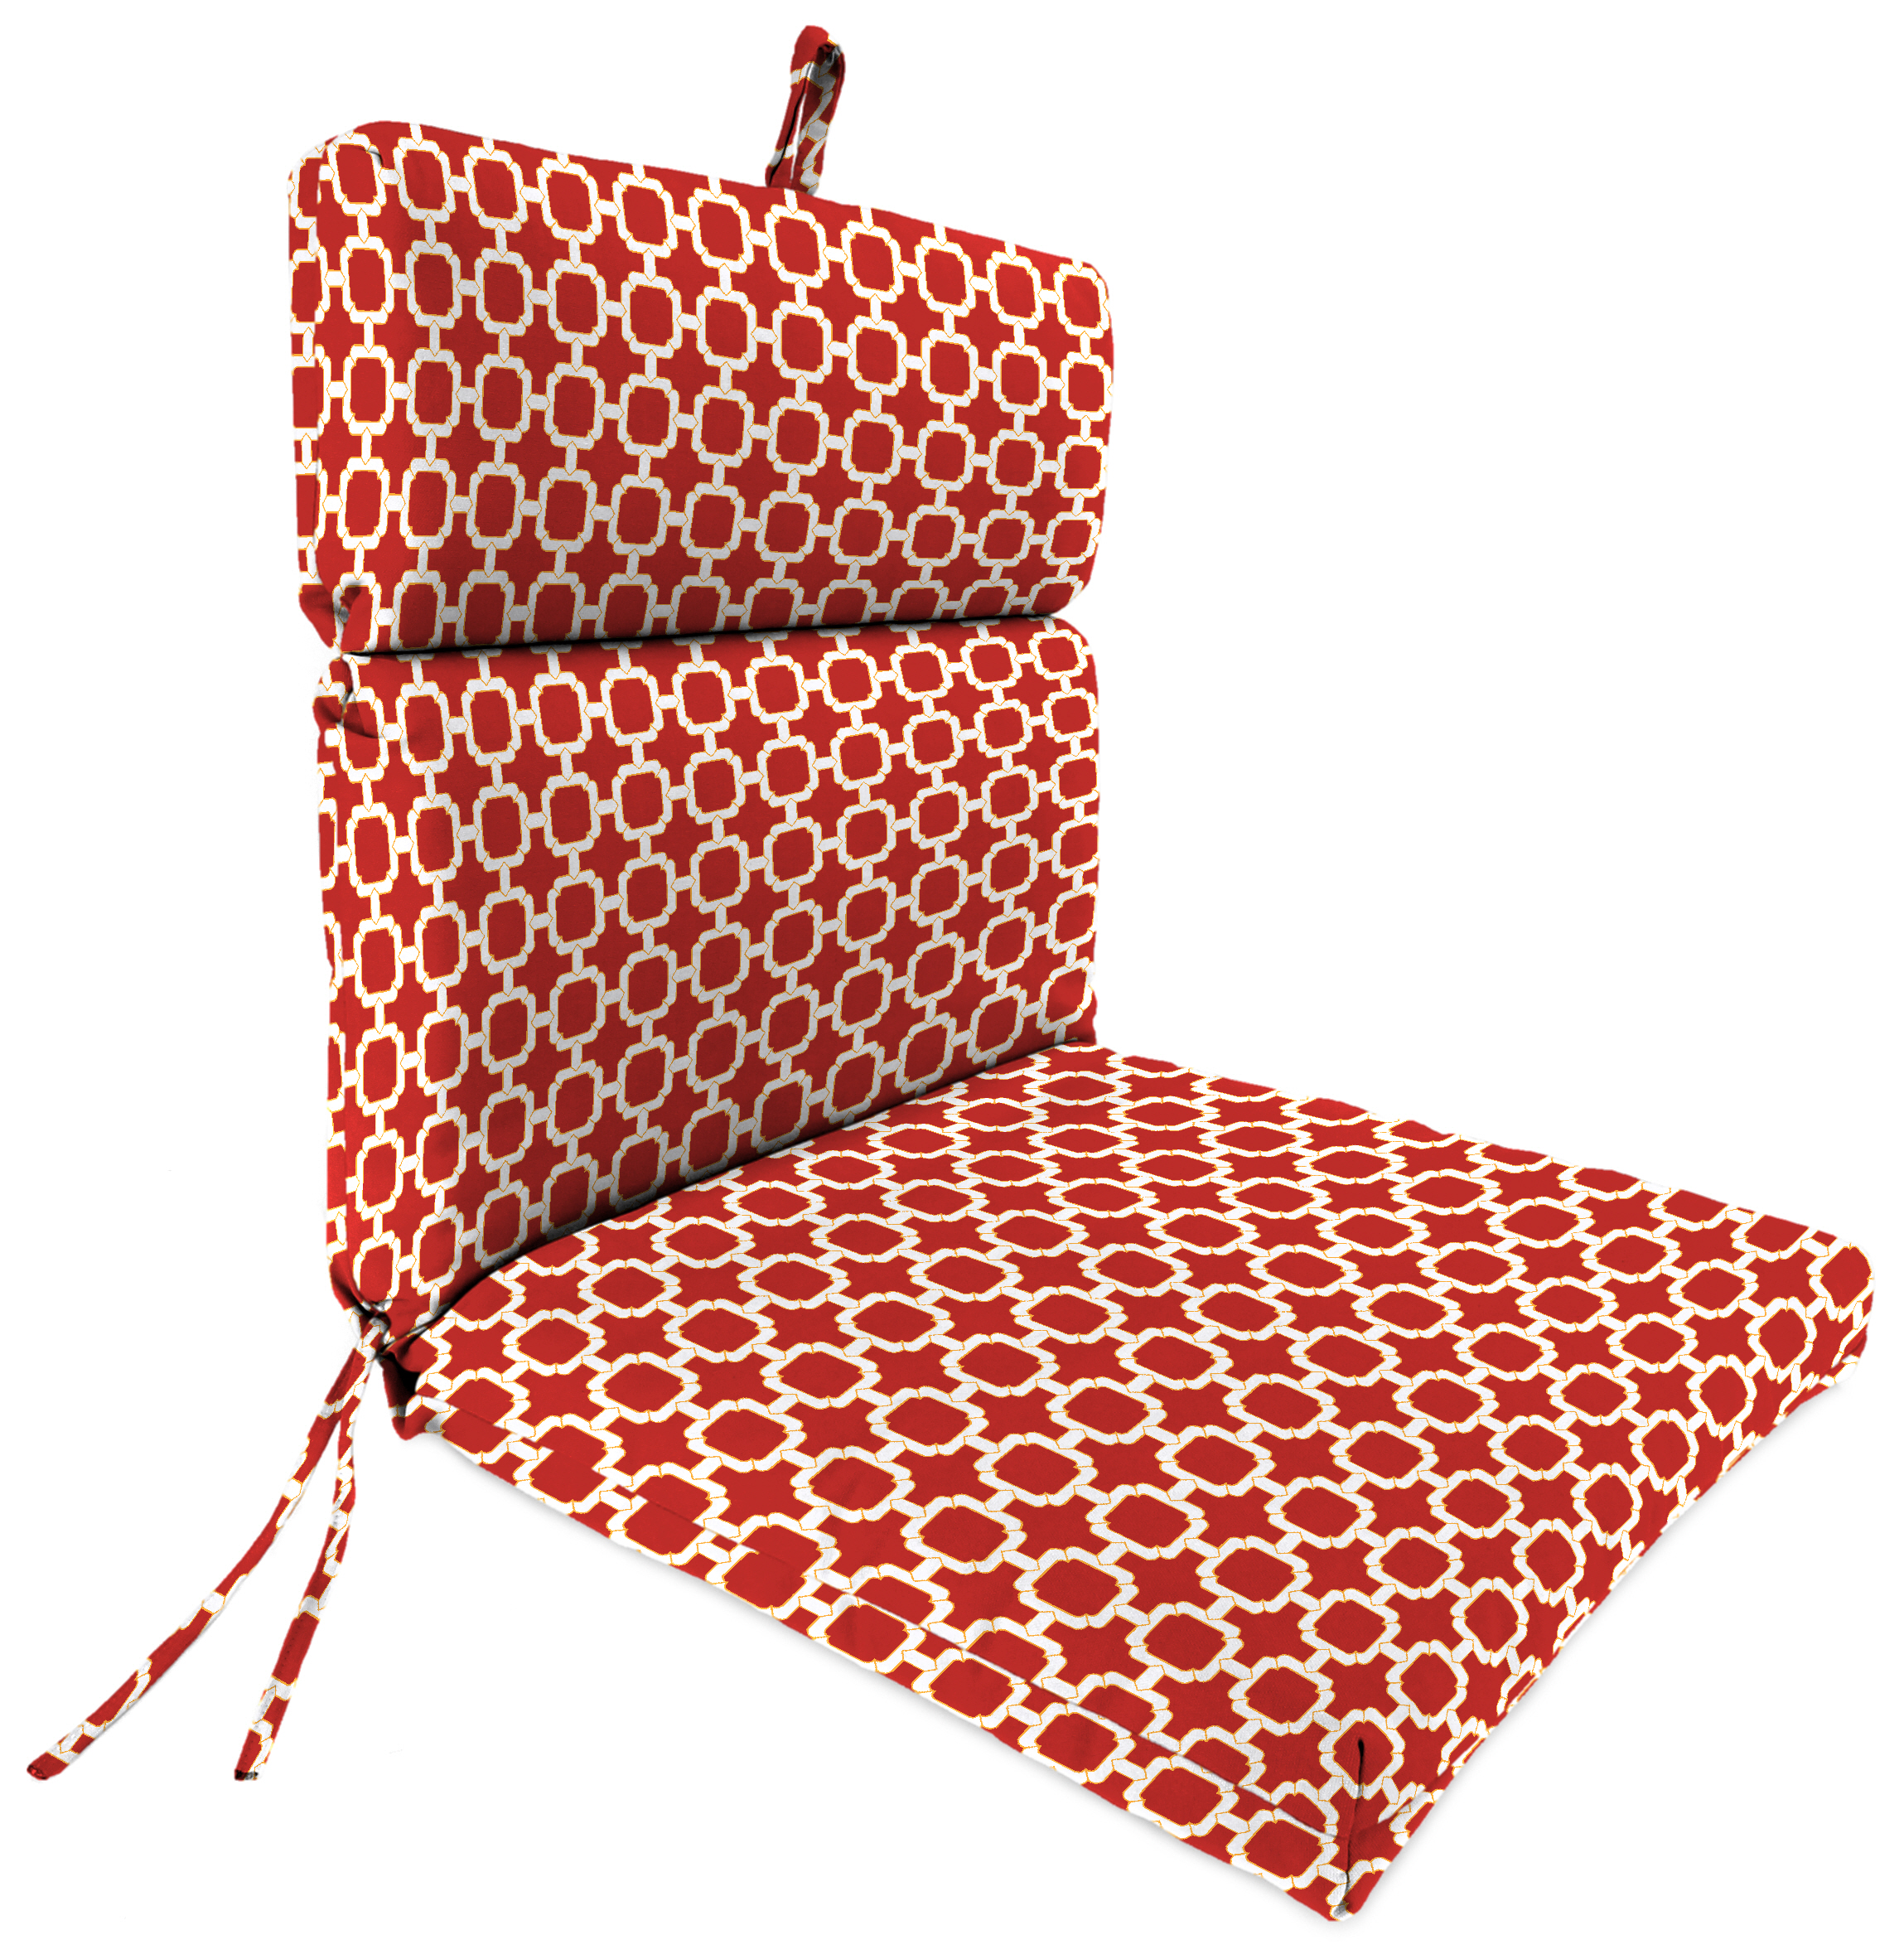 French Edge Patio Chair Cushion in Hockley Red